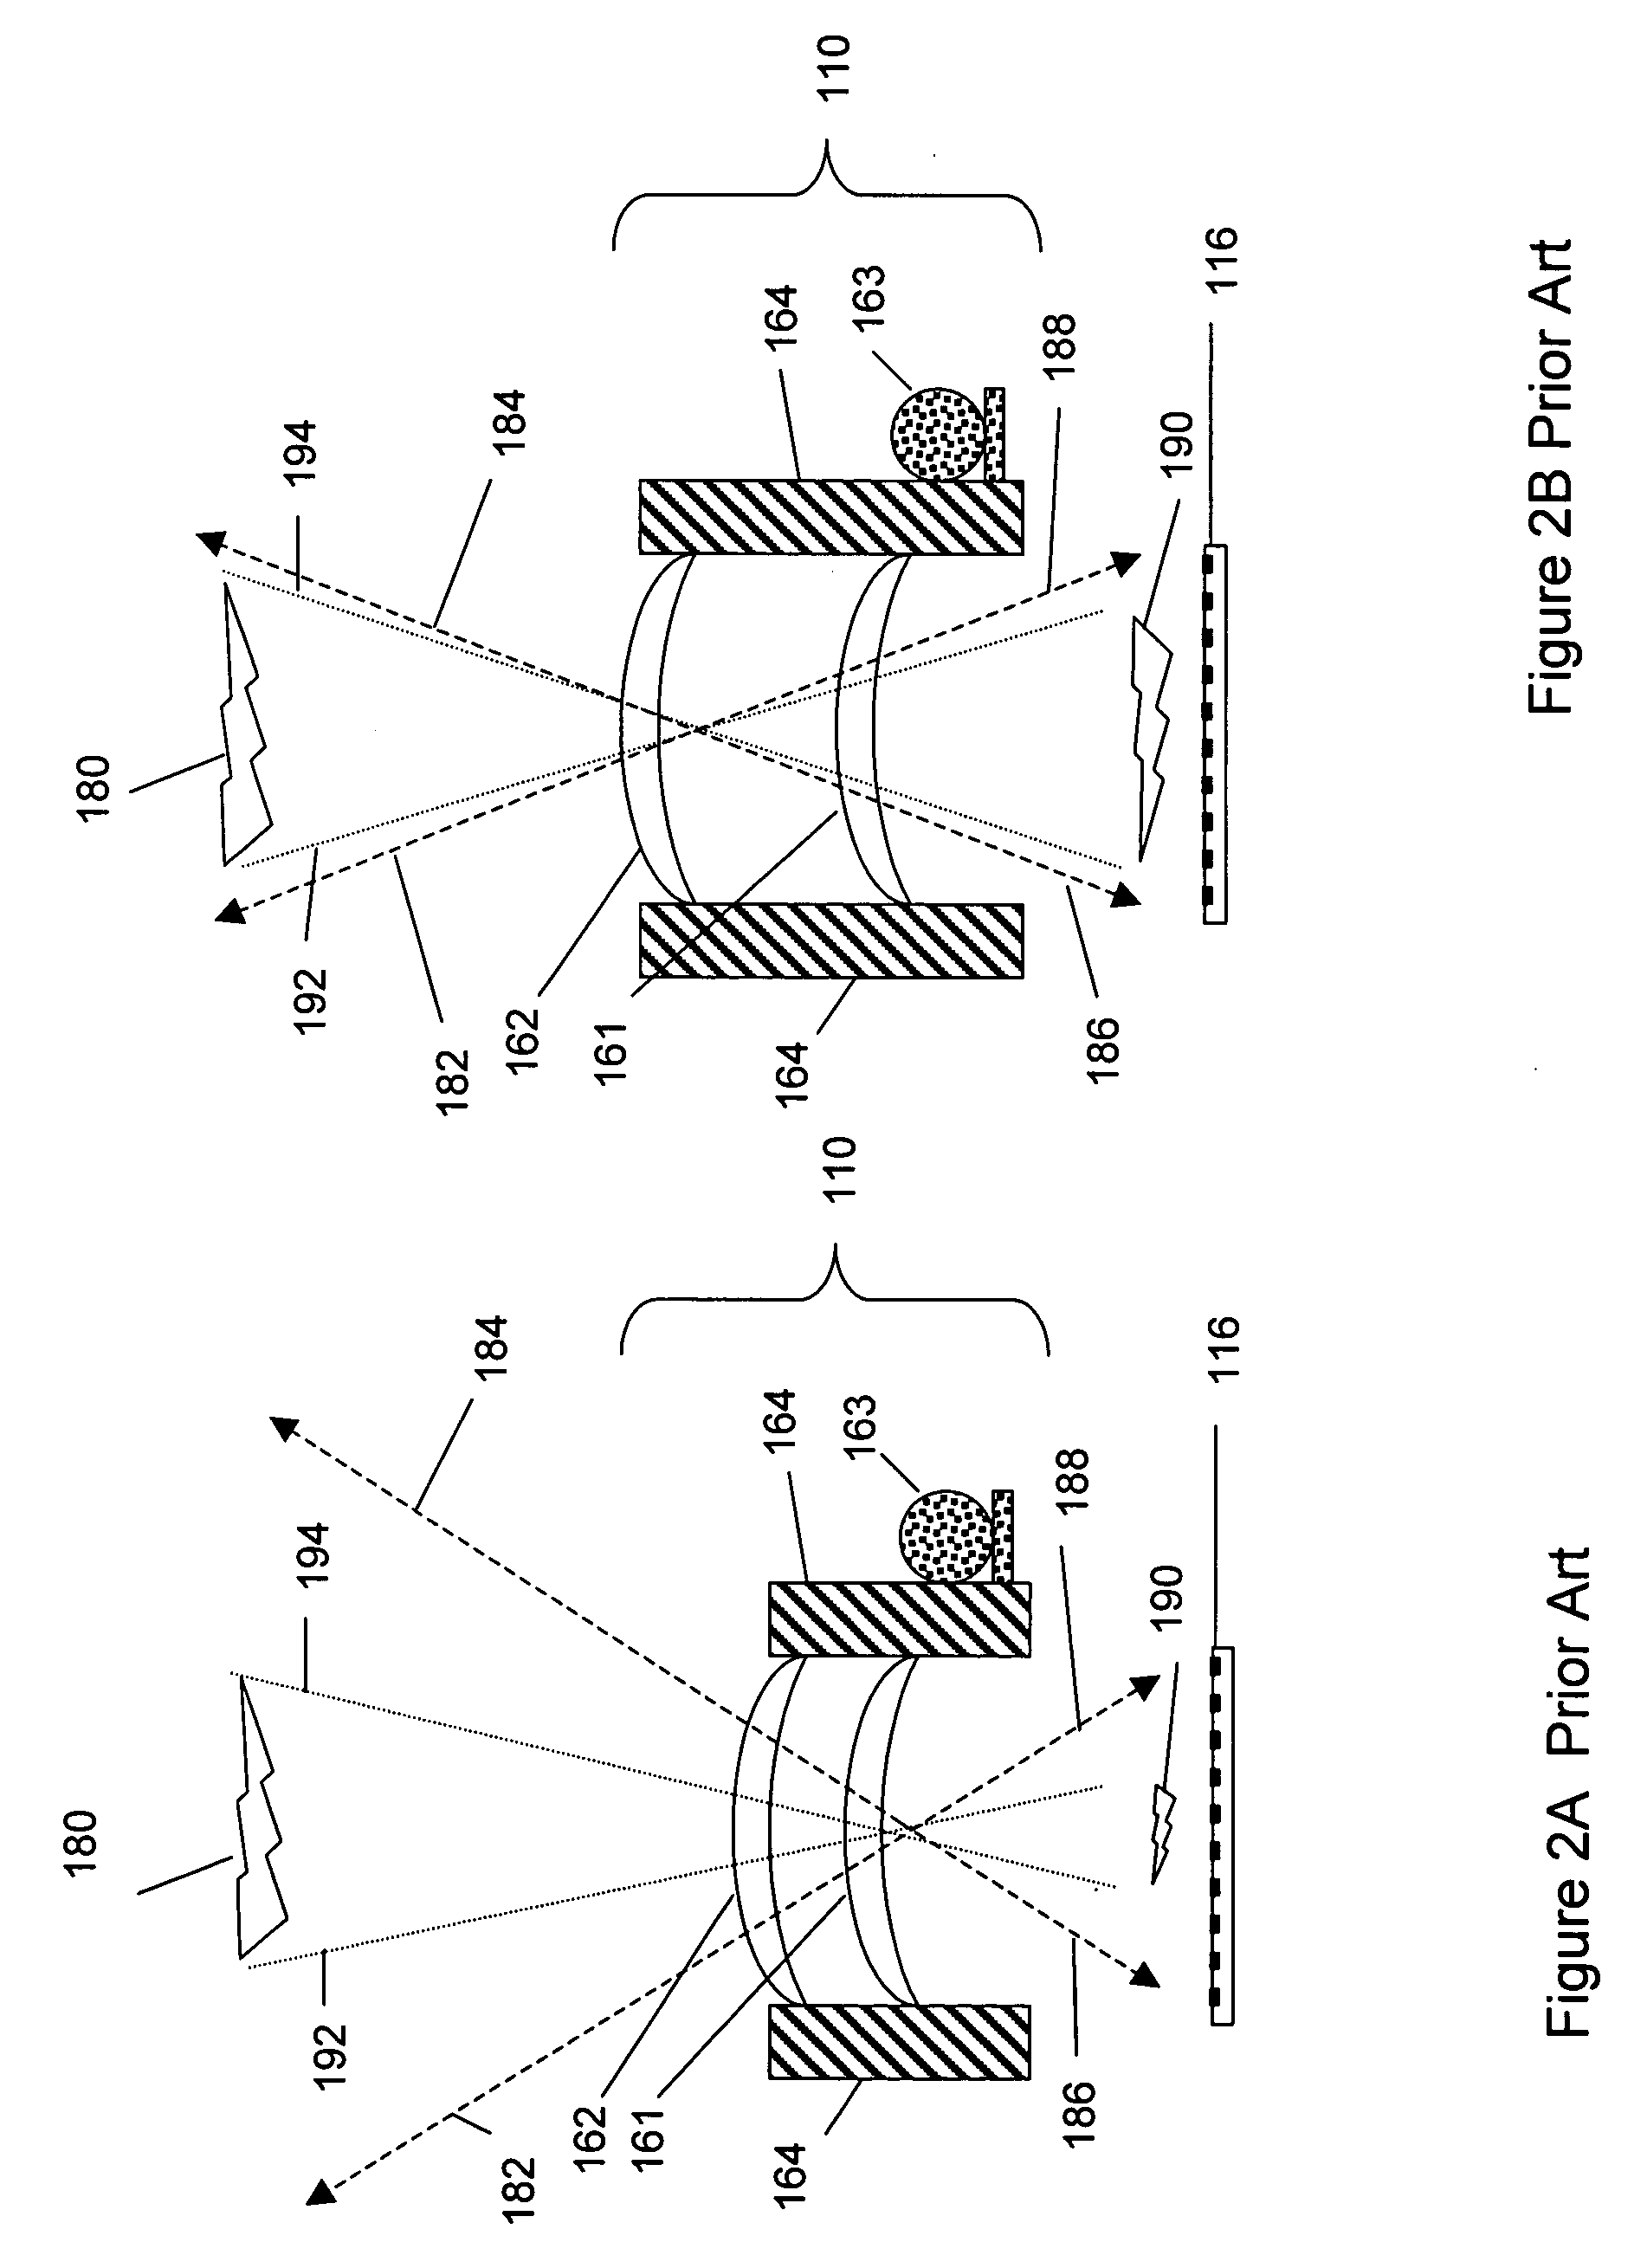 Method and apparatus for use in camera and systems employing same